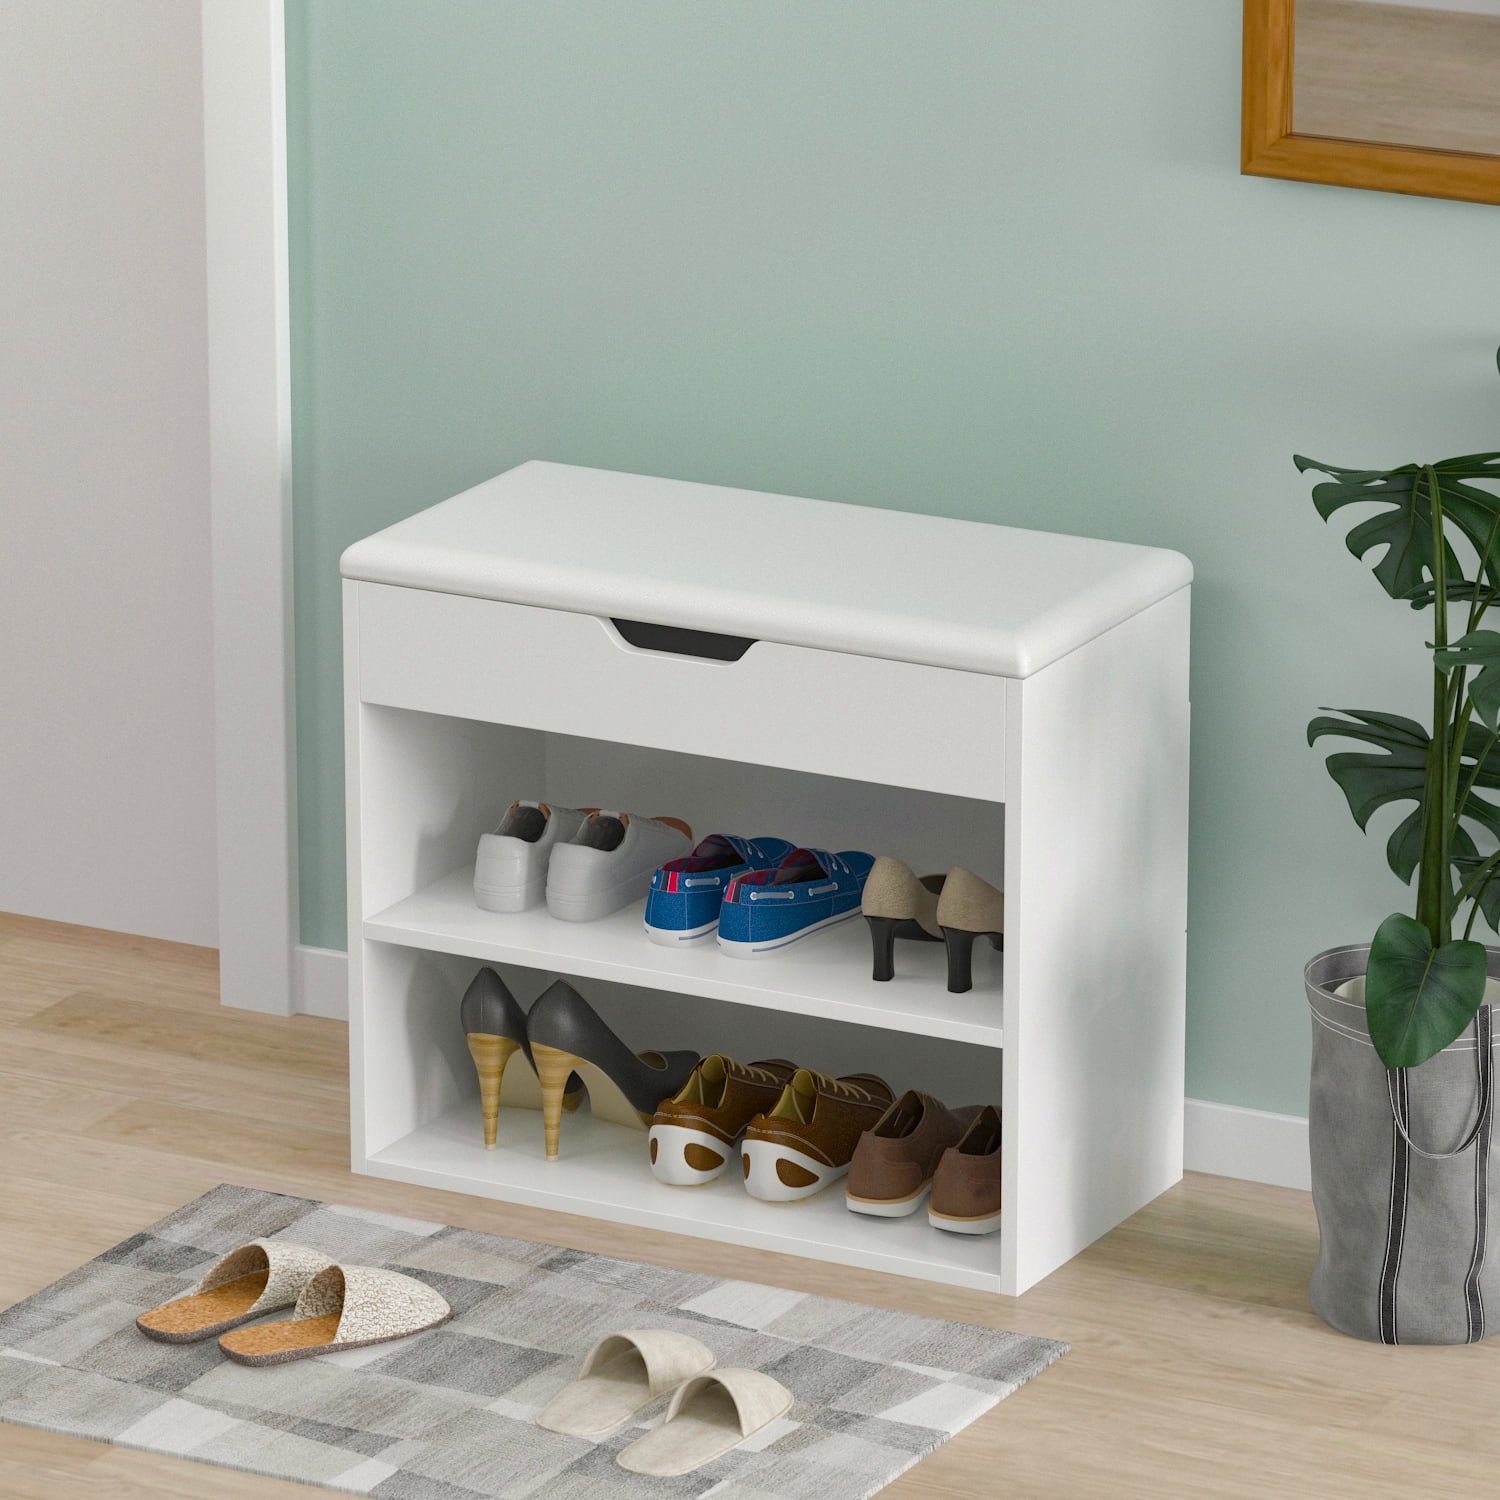 Apicizon Shoe Bench, Entryway Storage Benches, White Shoe Storage with Flip Top and Padded Cushion,Wooden Shoe Bench for Entryway, 2-Tier Shoe Rack